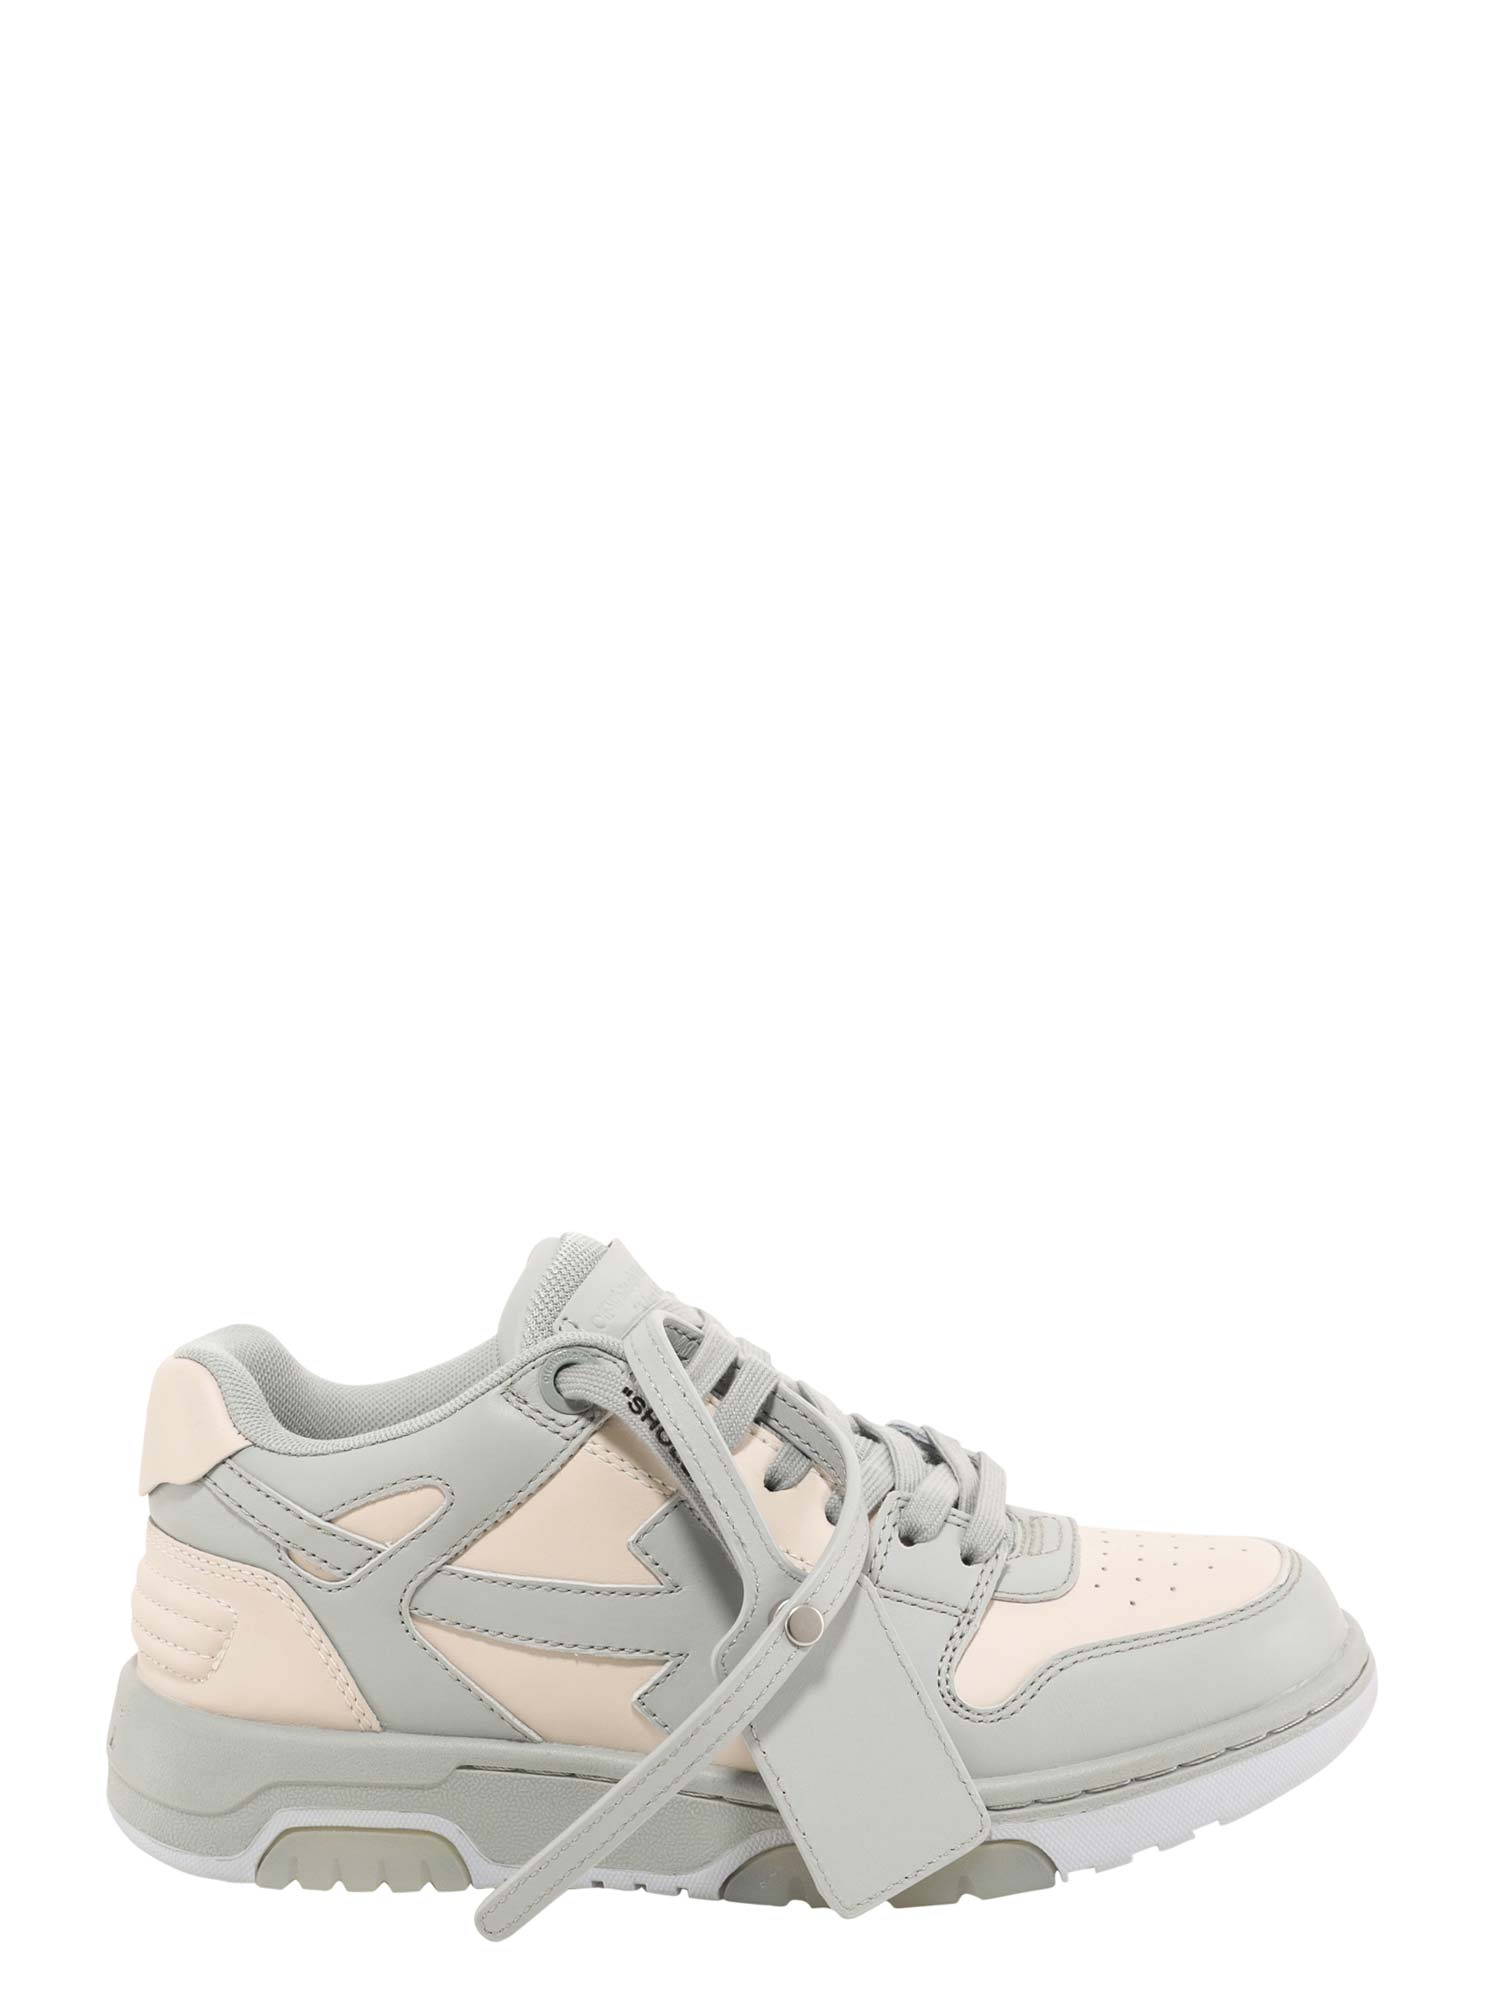 OFF-WHITE trainers,11829189